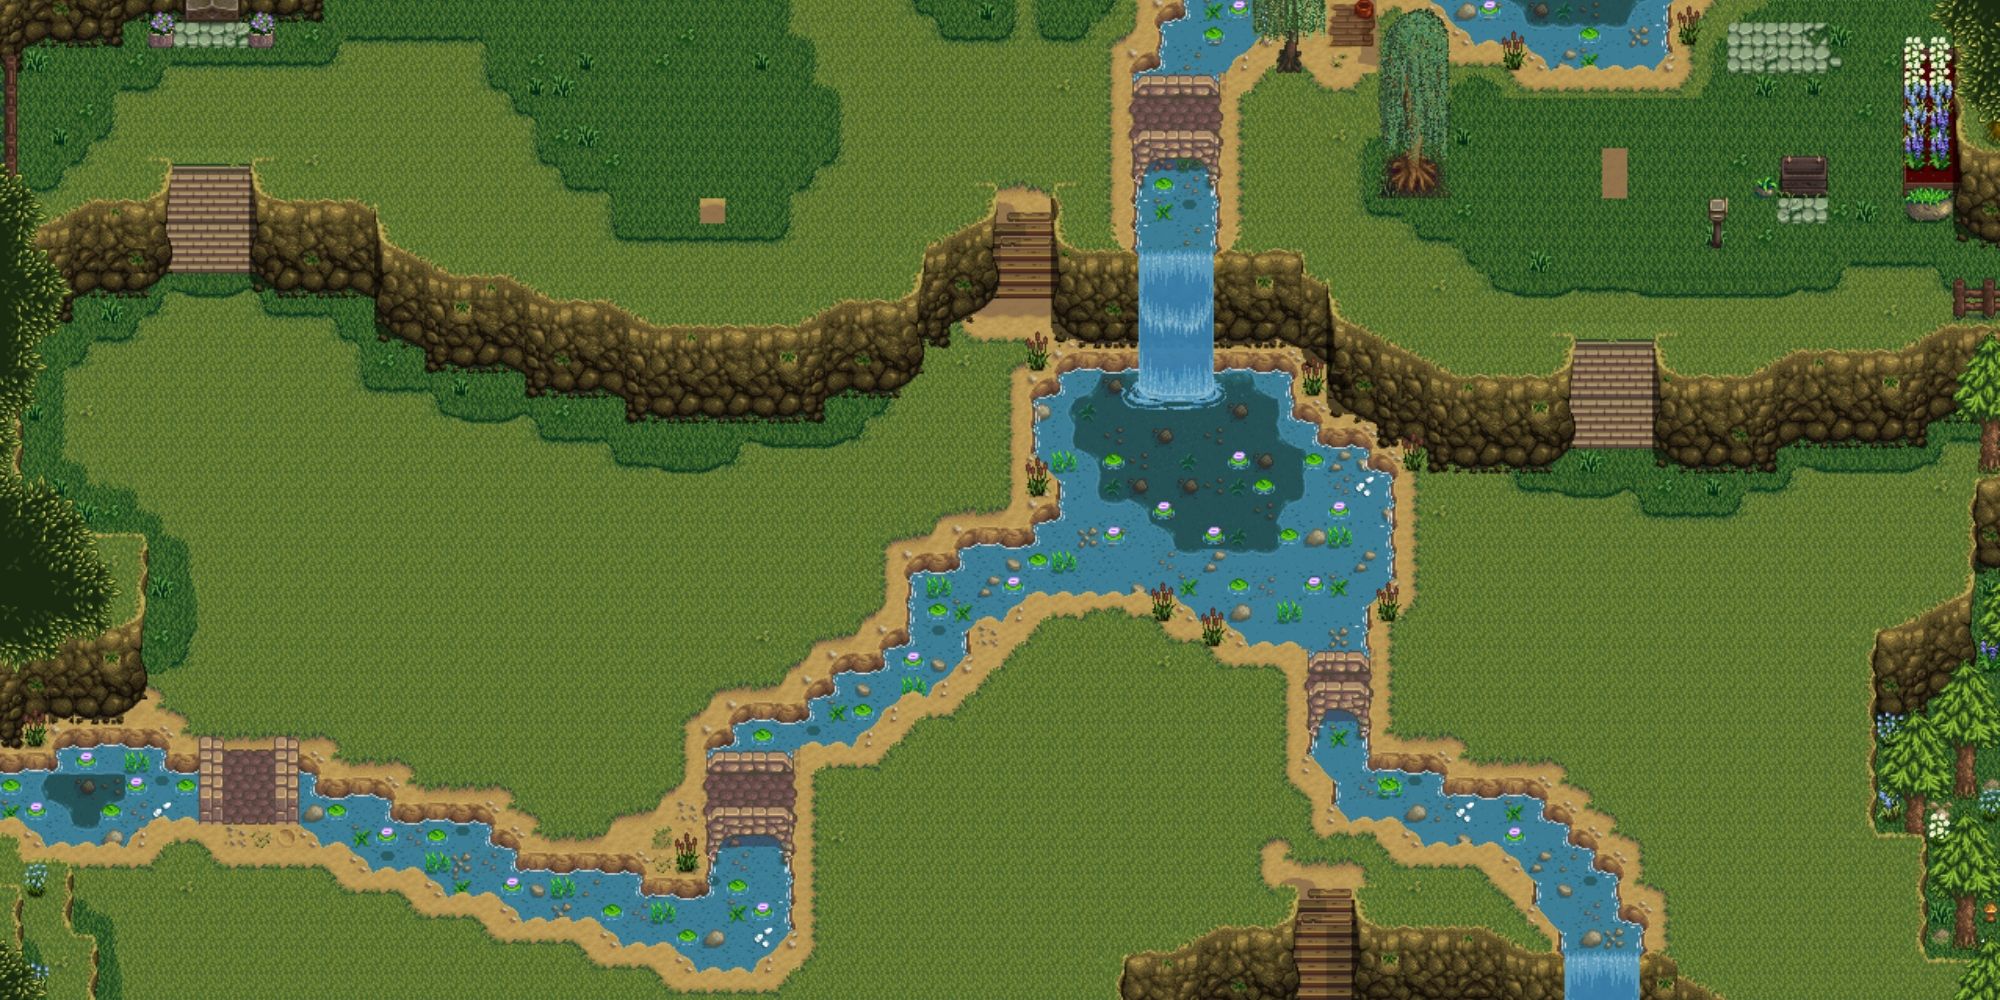 A Stardew Valley farm map with a branching river cutting through the whole thing